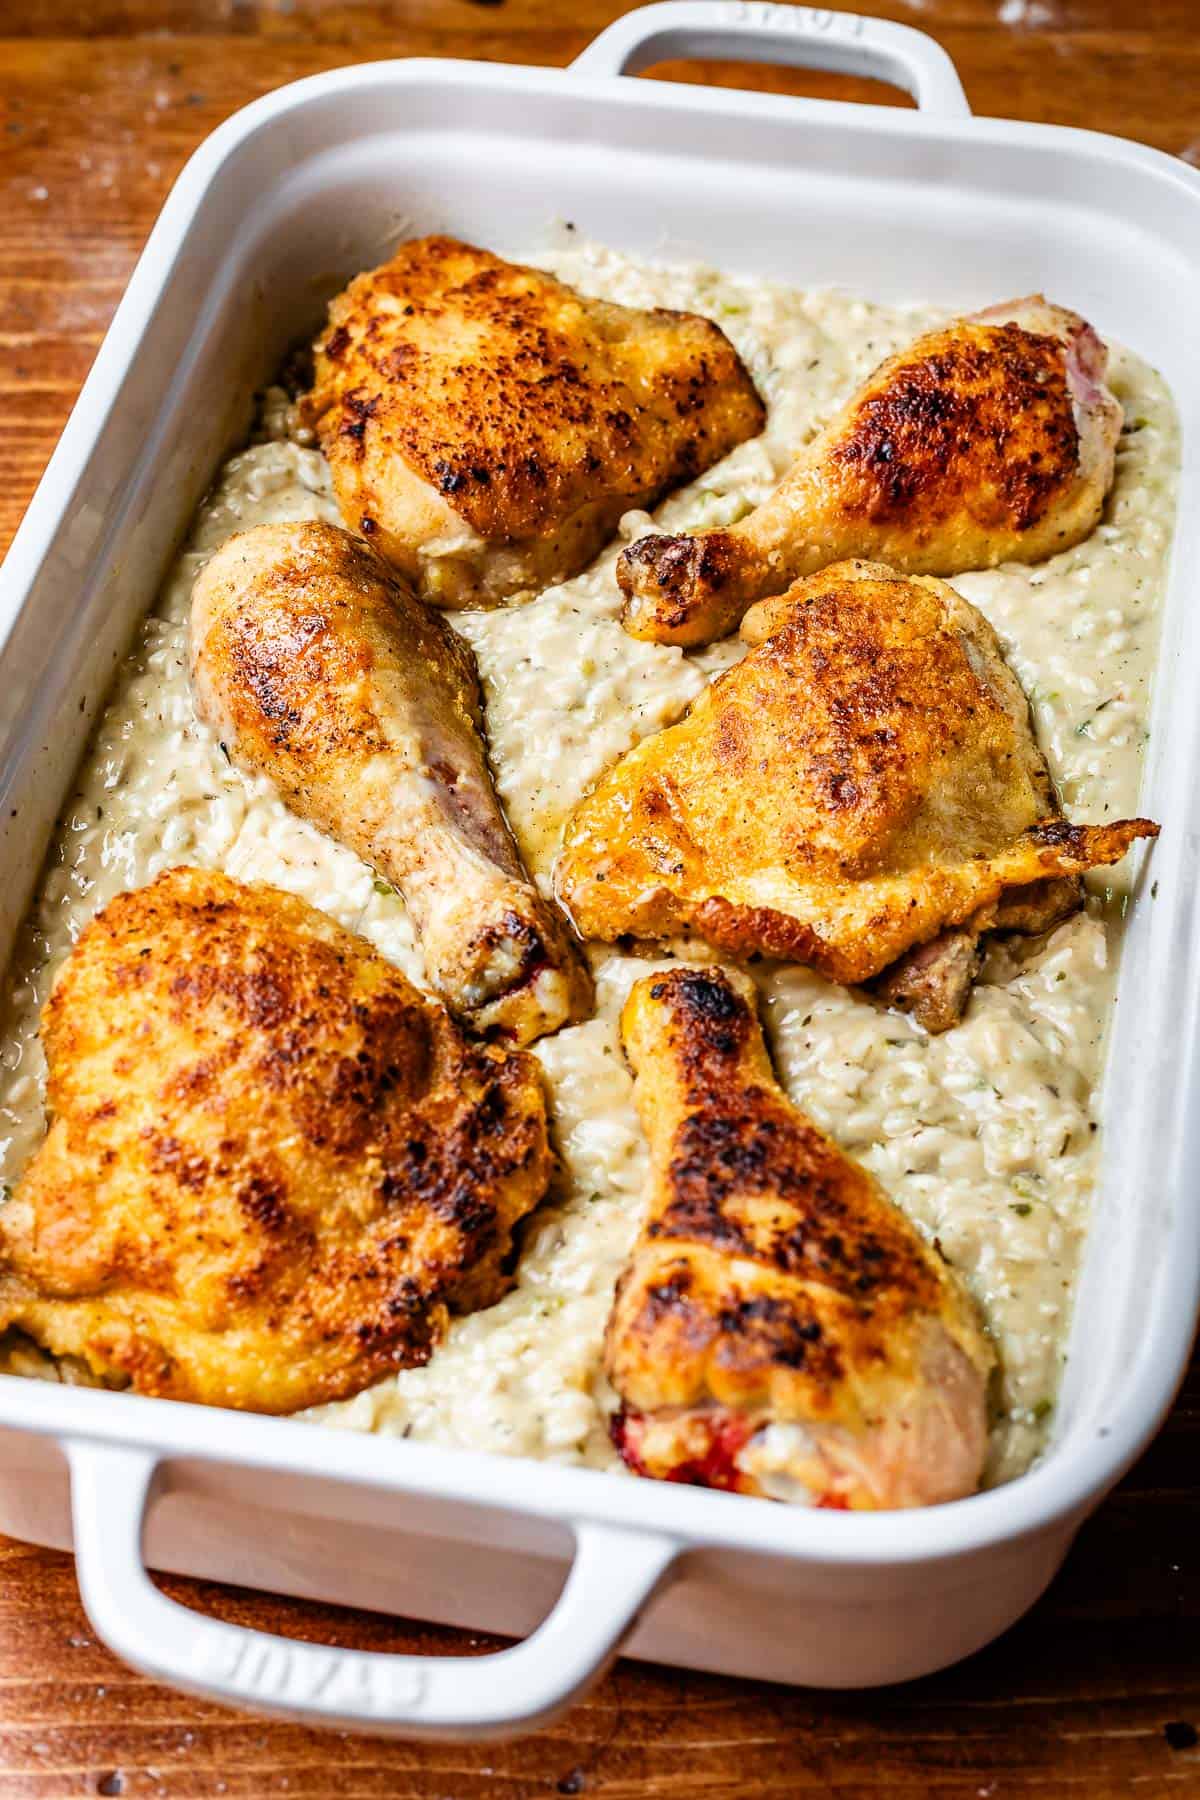 seared chicken pieces nestled into a rice and white sauce/water mix in a casserole dish.